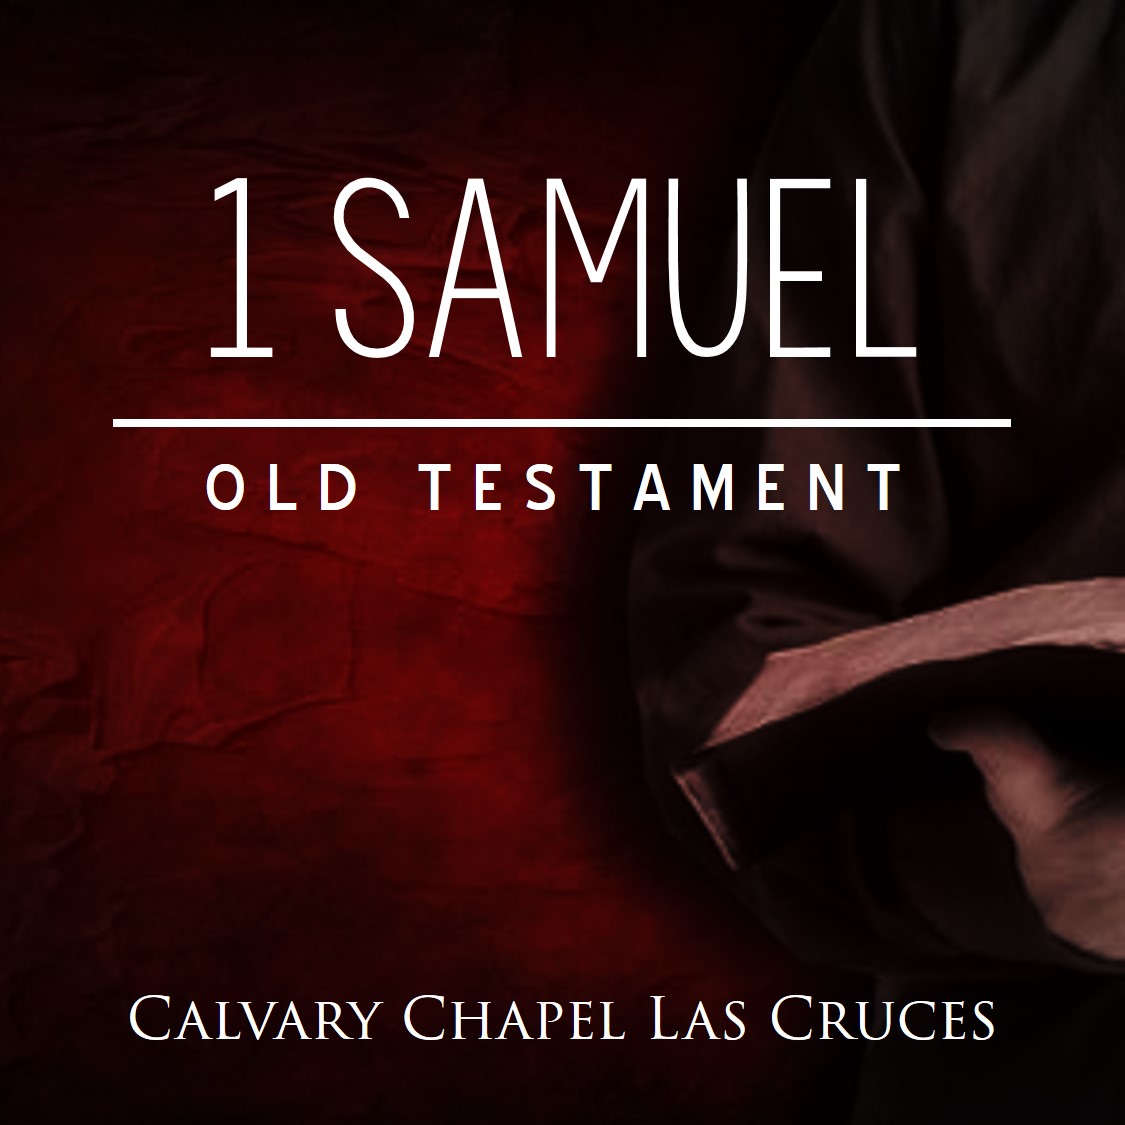 1 Samuel Chapter 16 - ”David Anointed King”